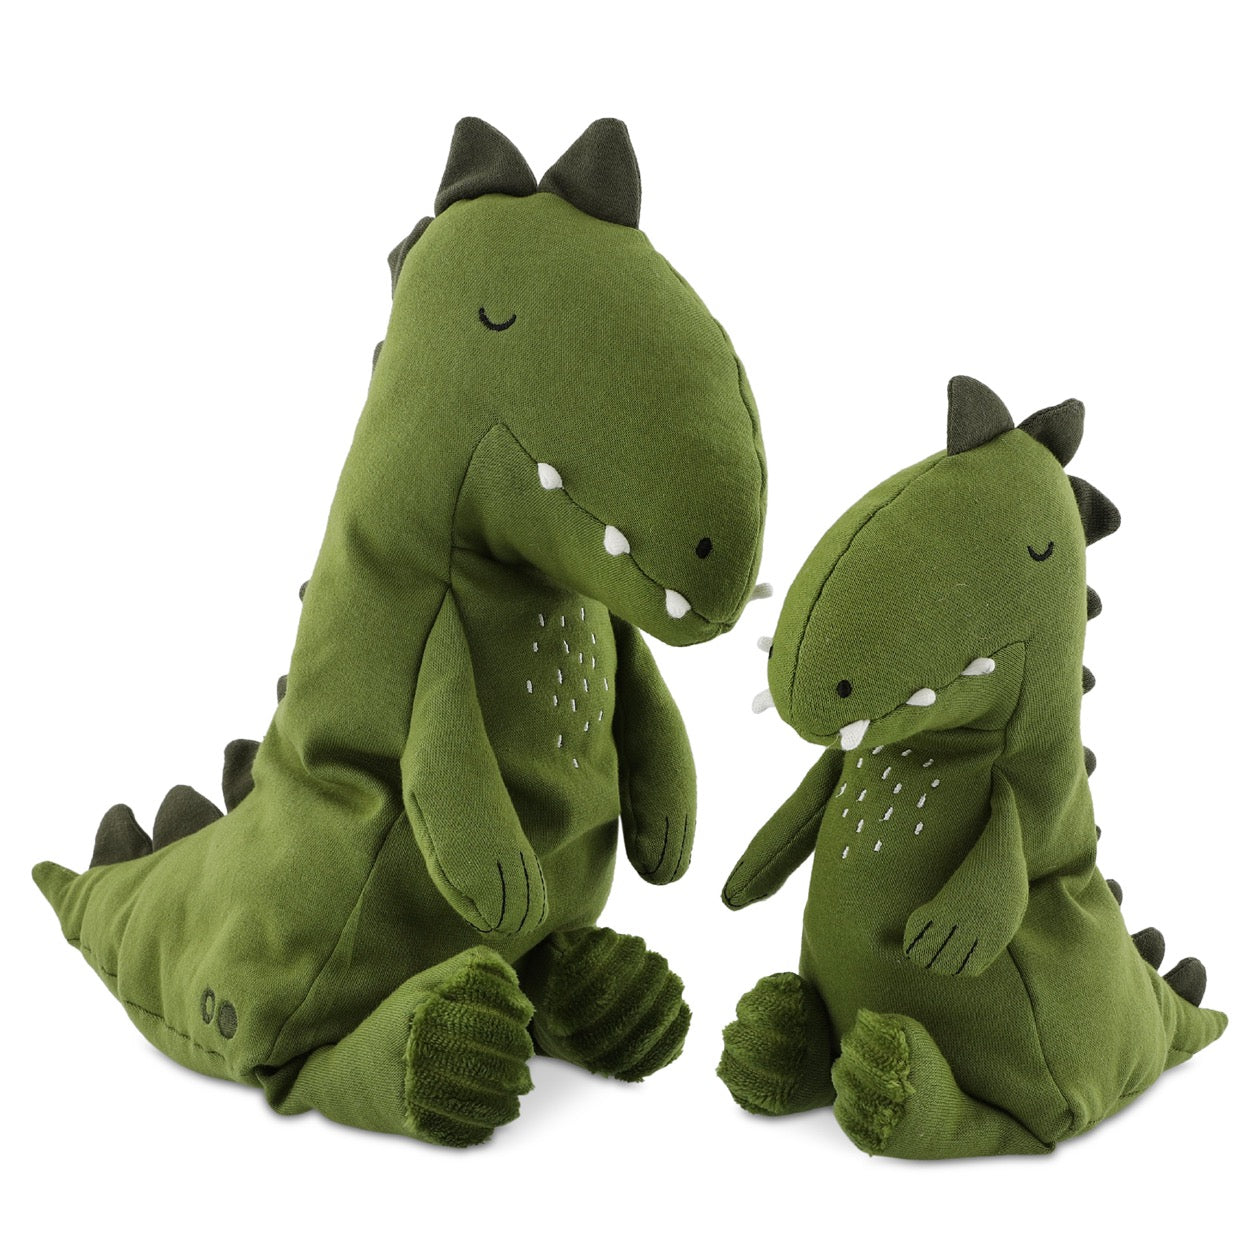 Trixie Baby Mr. Dino, Large